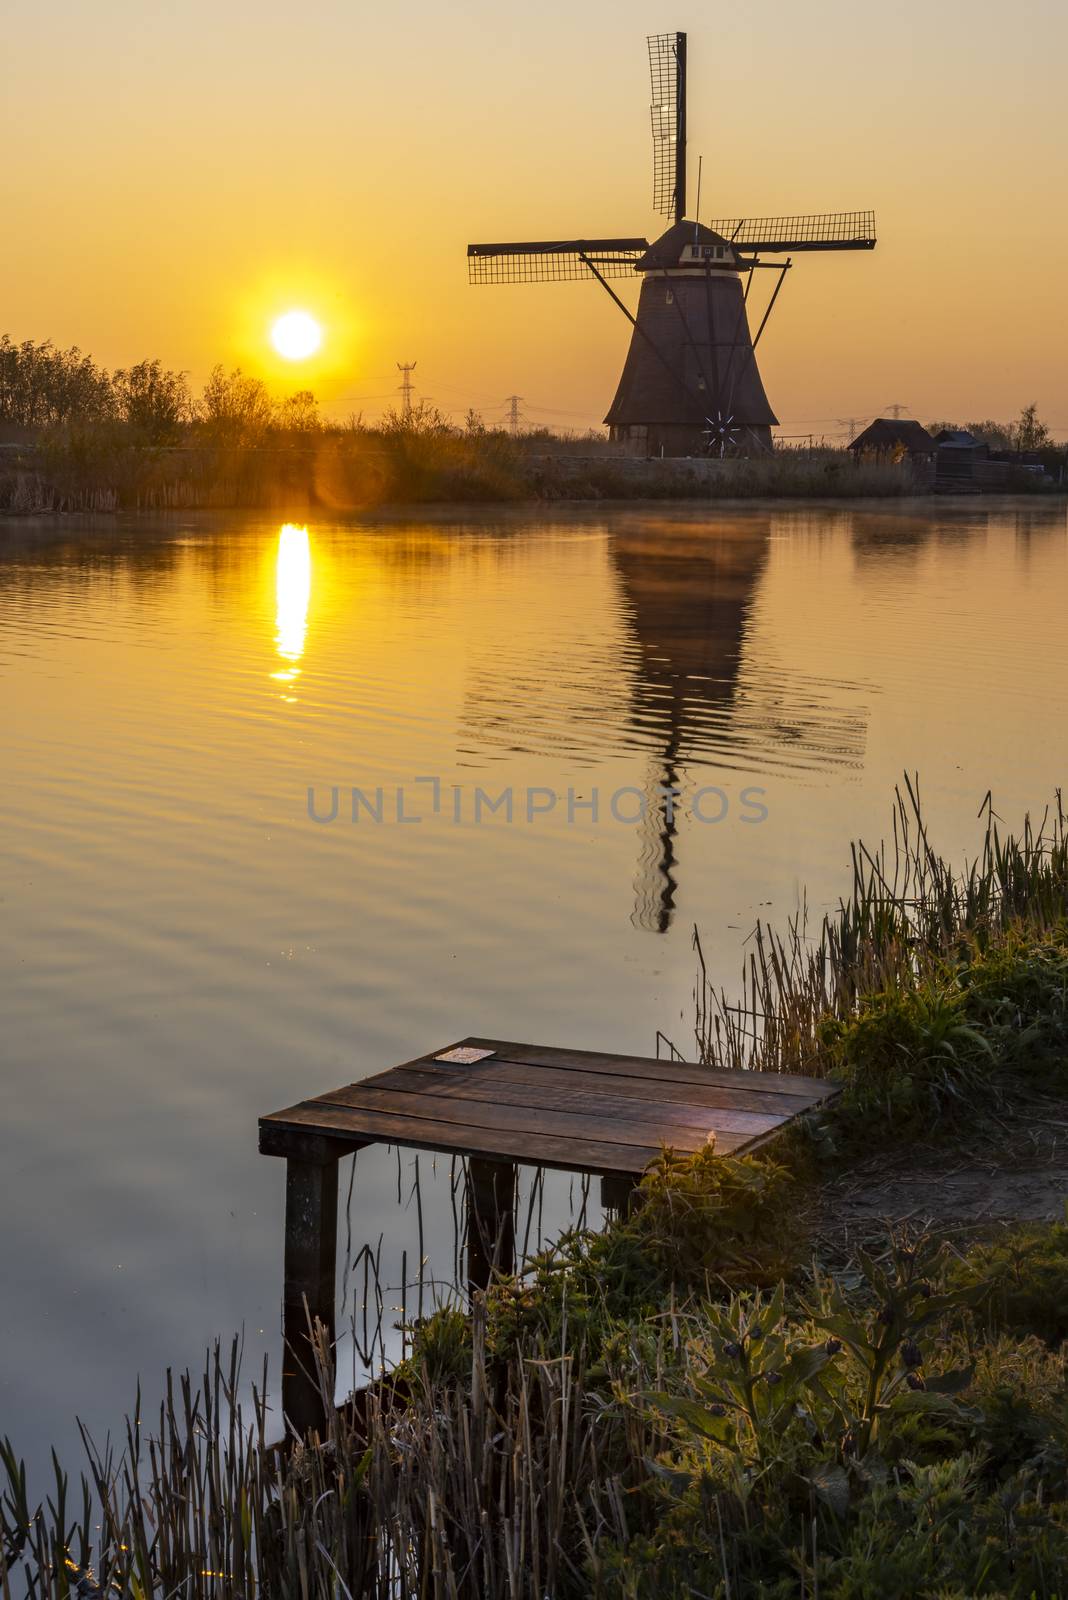 Embarquement at the edge with the calm water in the long canal during facing a windmill reflection in the burning sunrise color morning by ankorlight